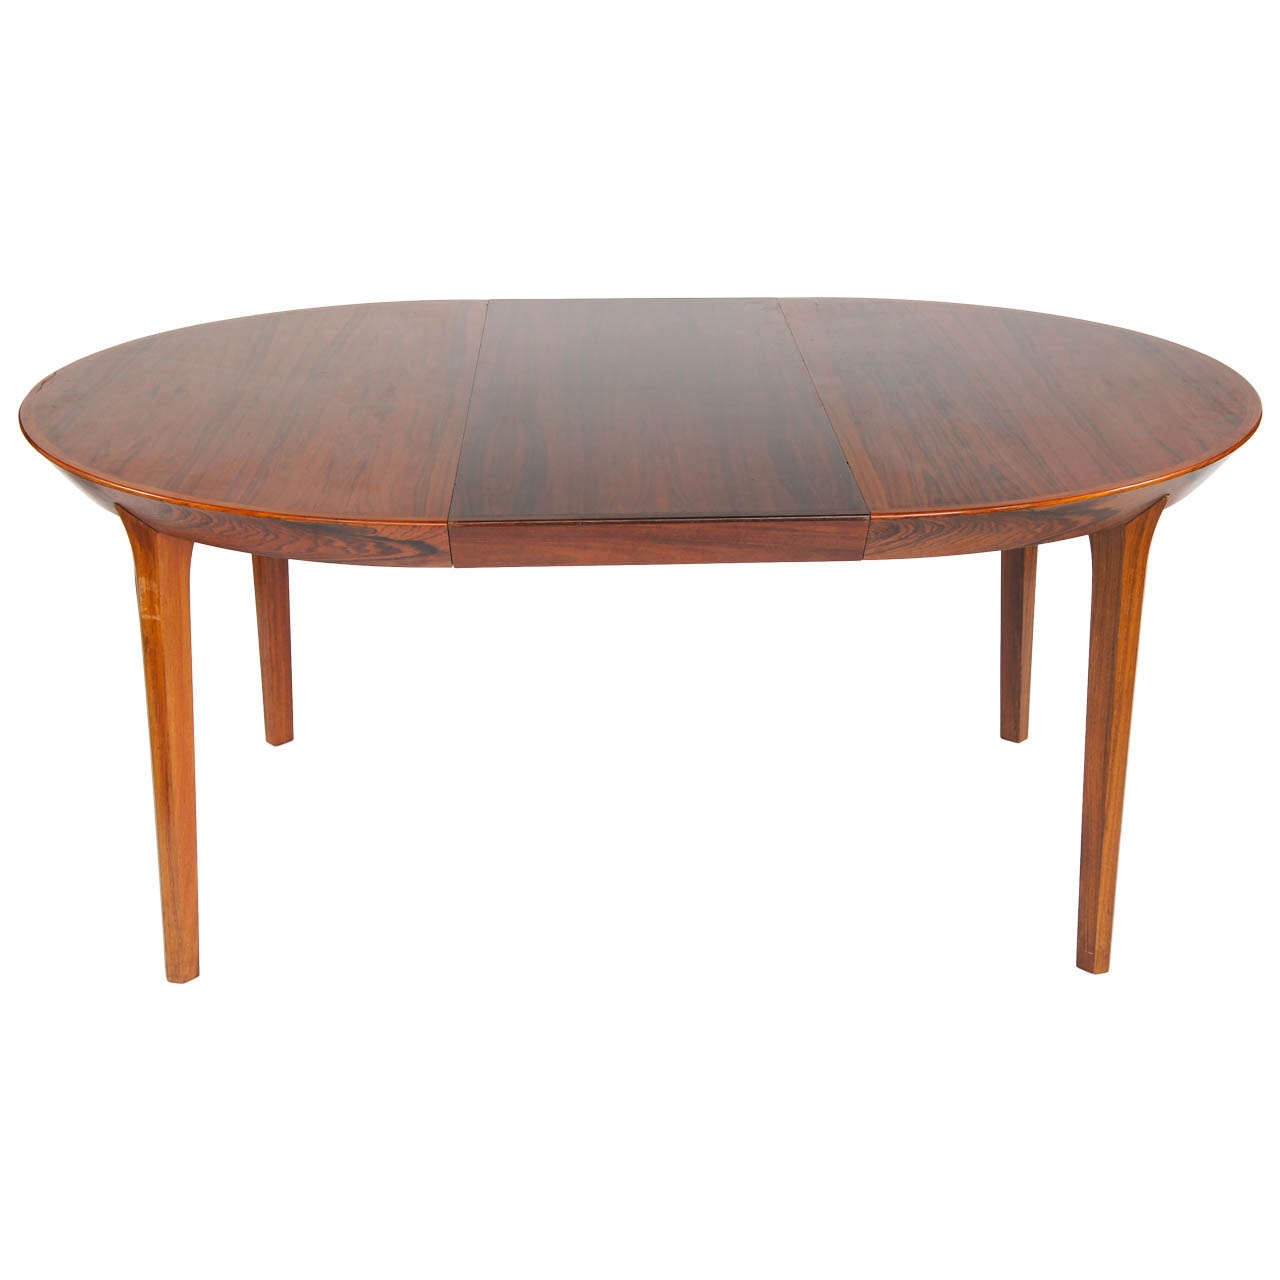 A Lovely Table of Rosewood with 2 Leaves.
Beautiful Leg Details with Amazing Form